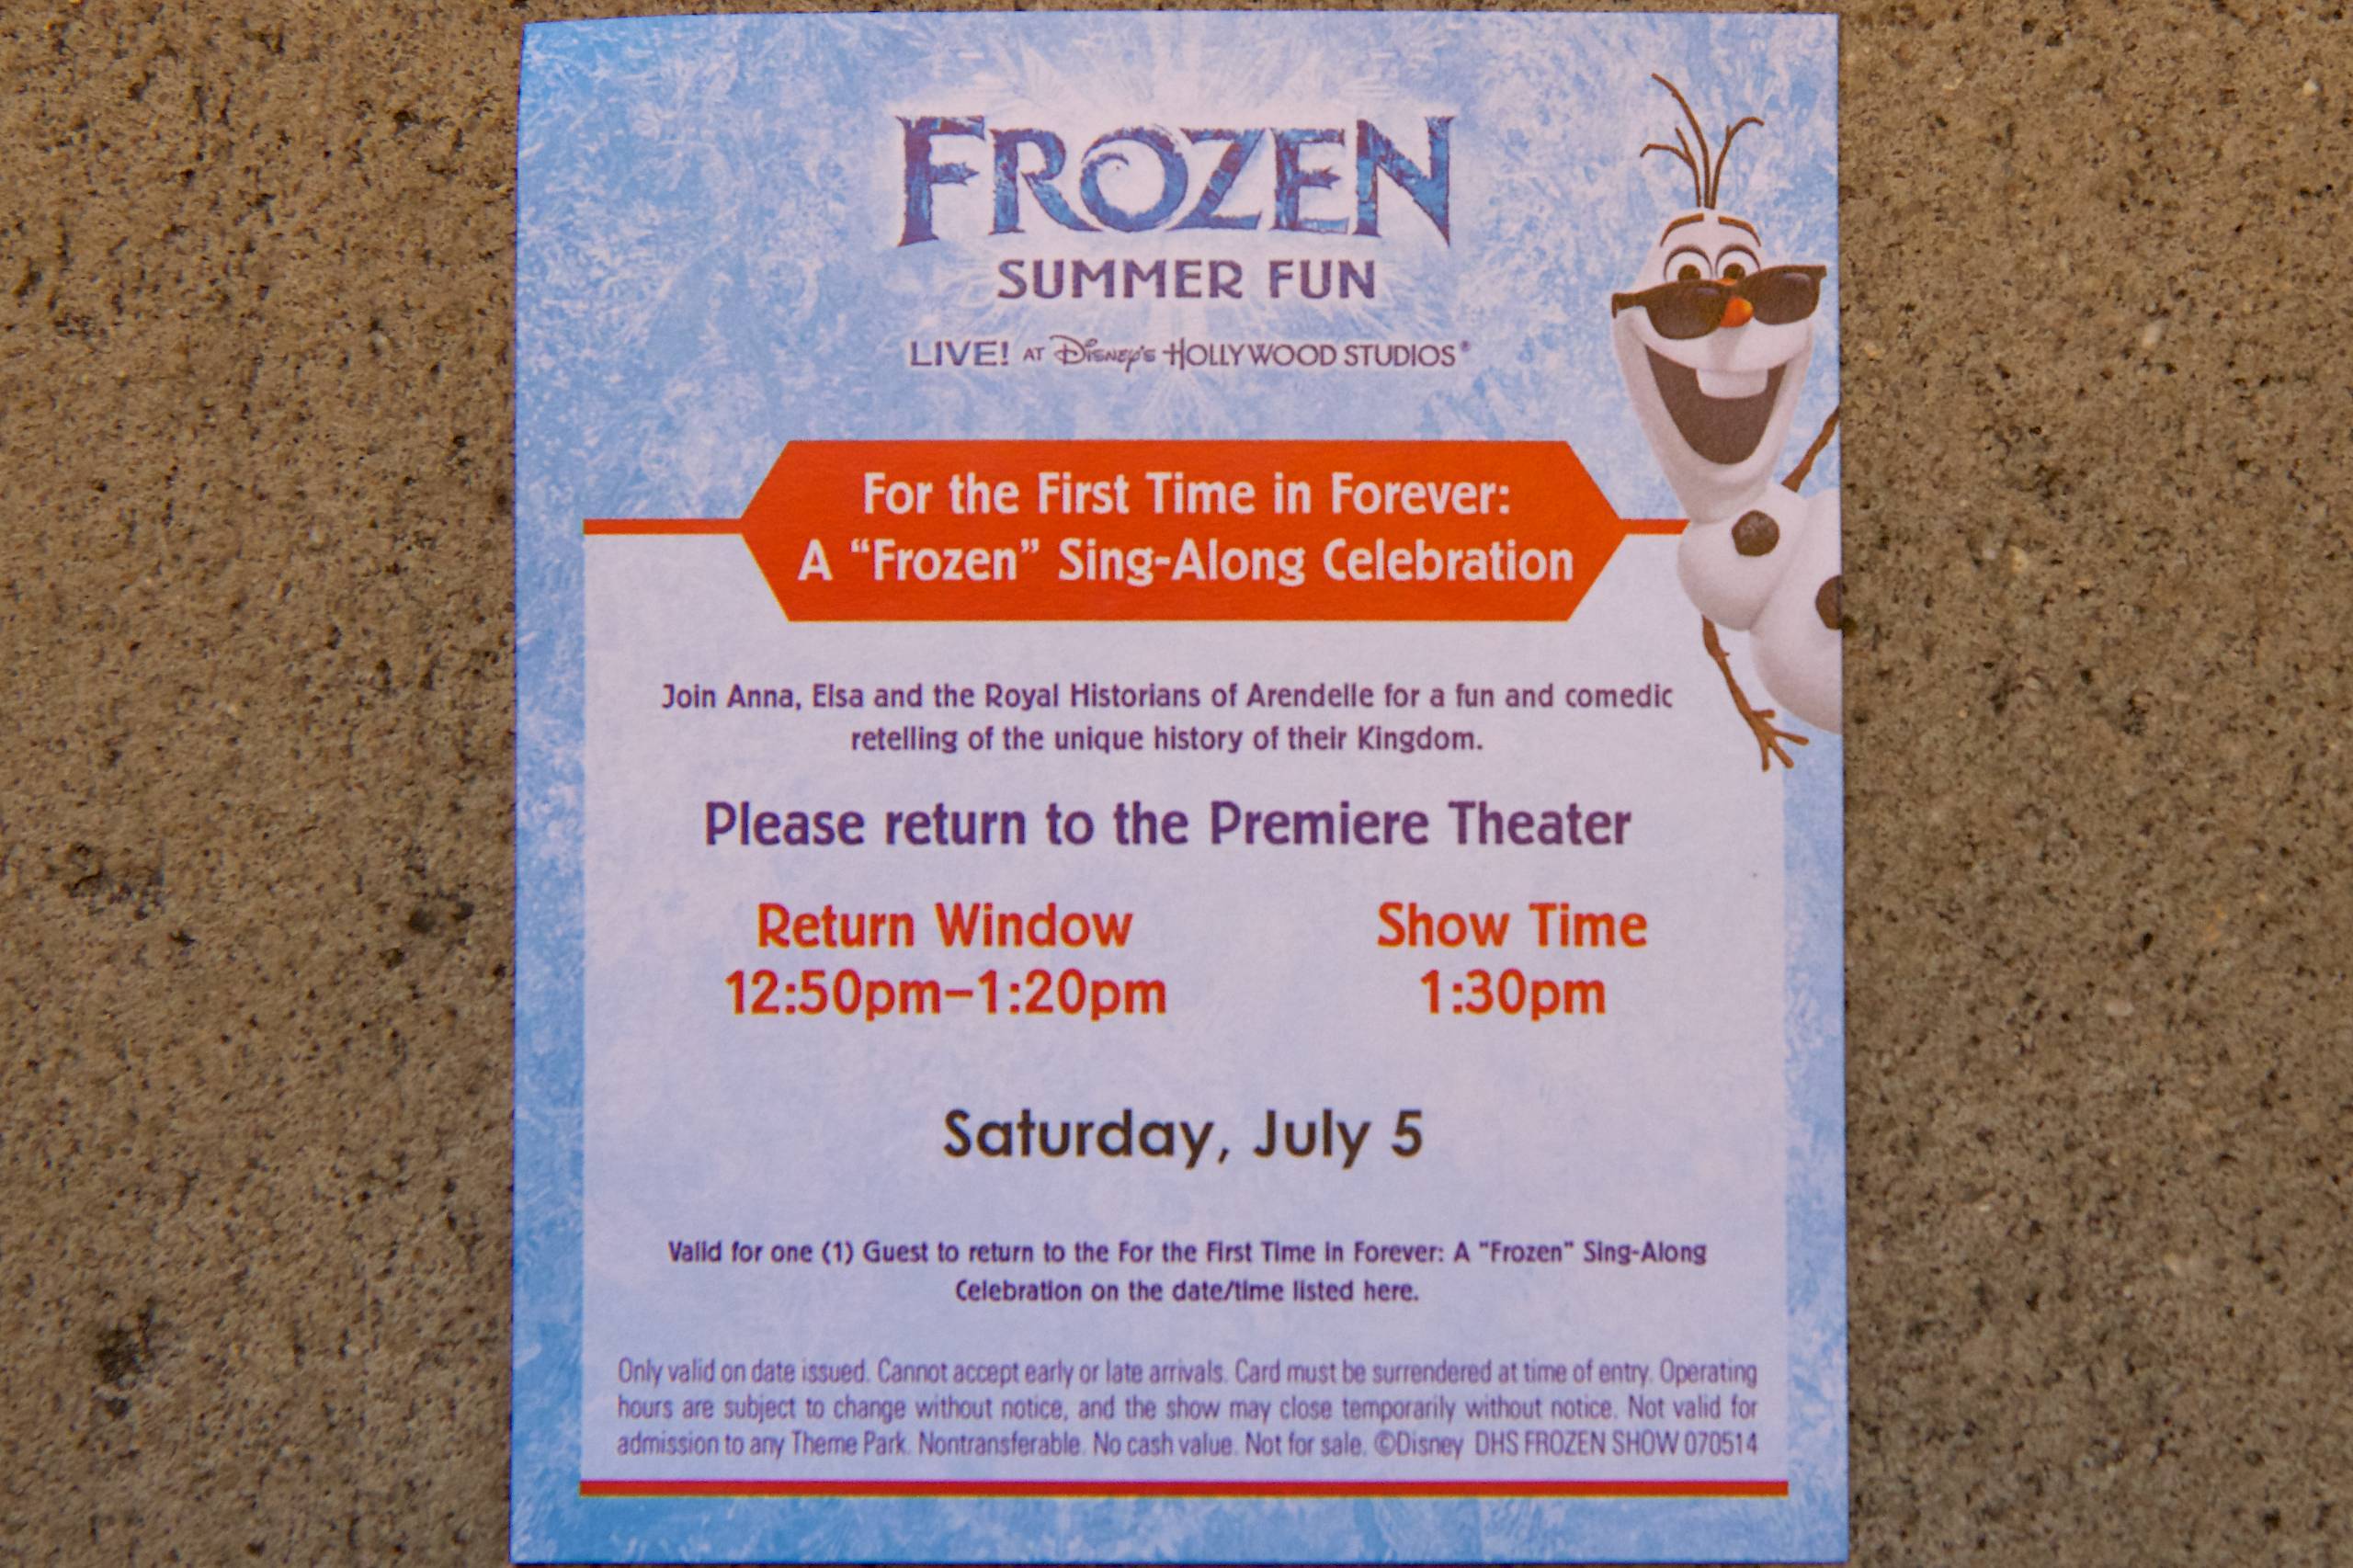 Frozen Summer Fun - For The First Time in Forever: A Frozen Sing-Along Celebration show ticket